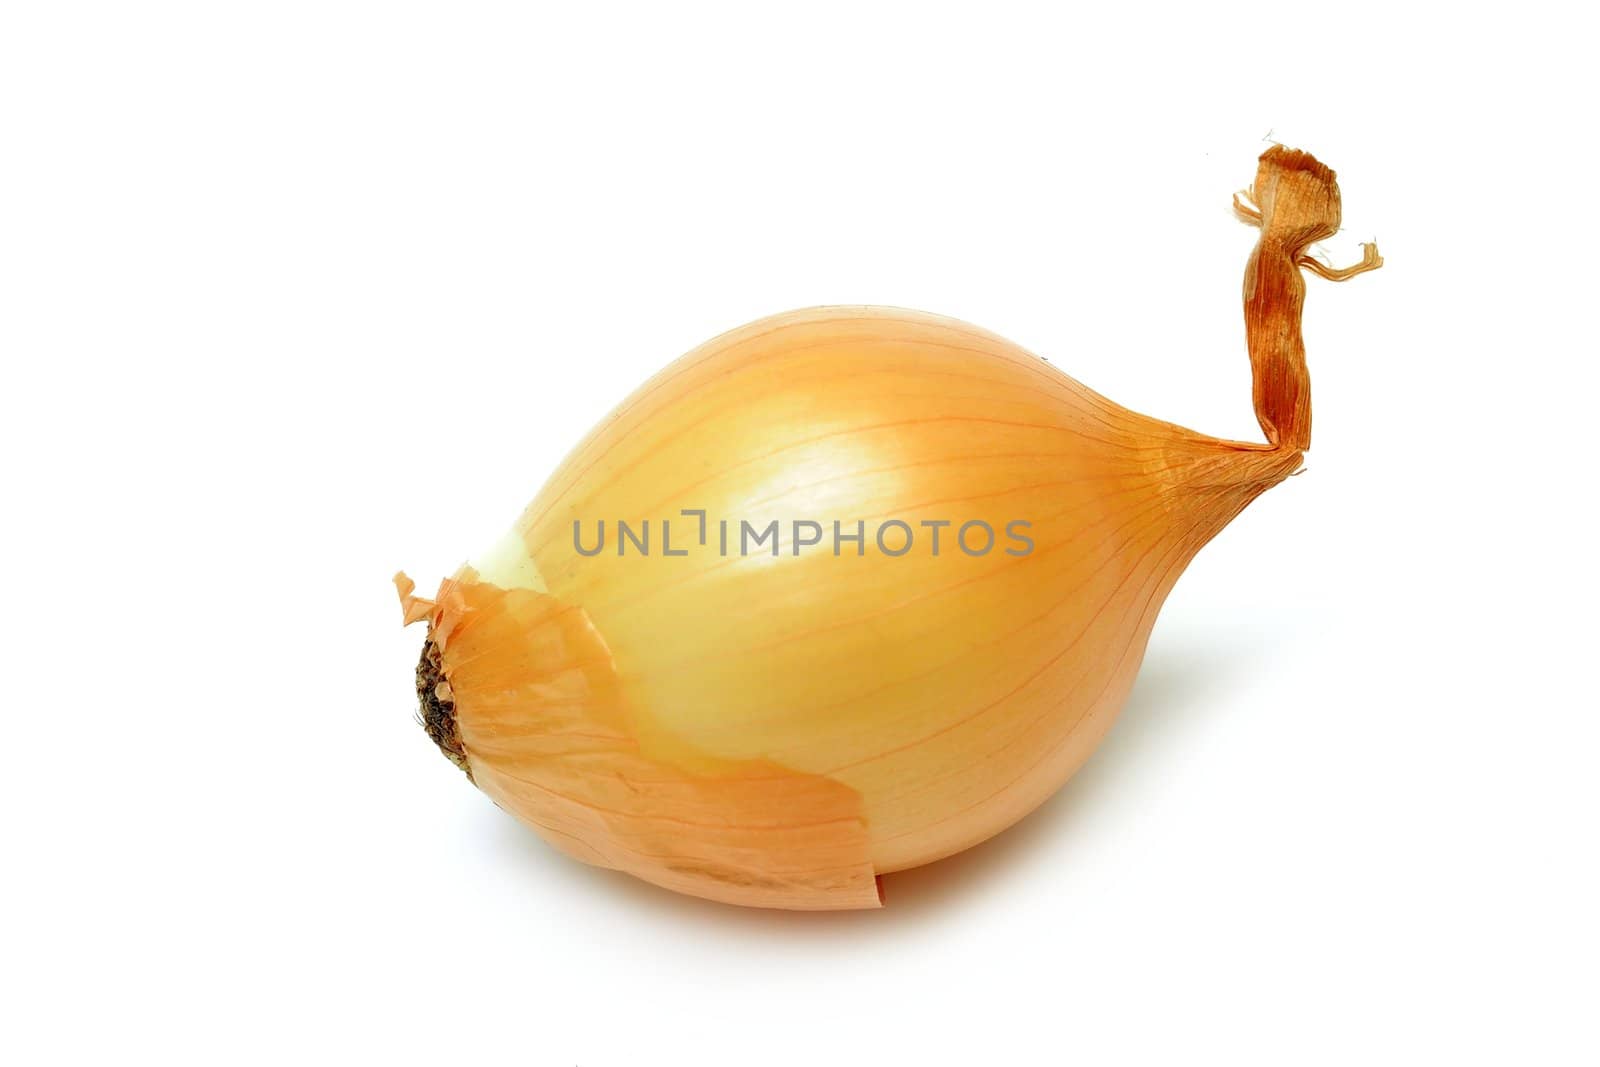 An image of an onion on white background